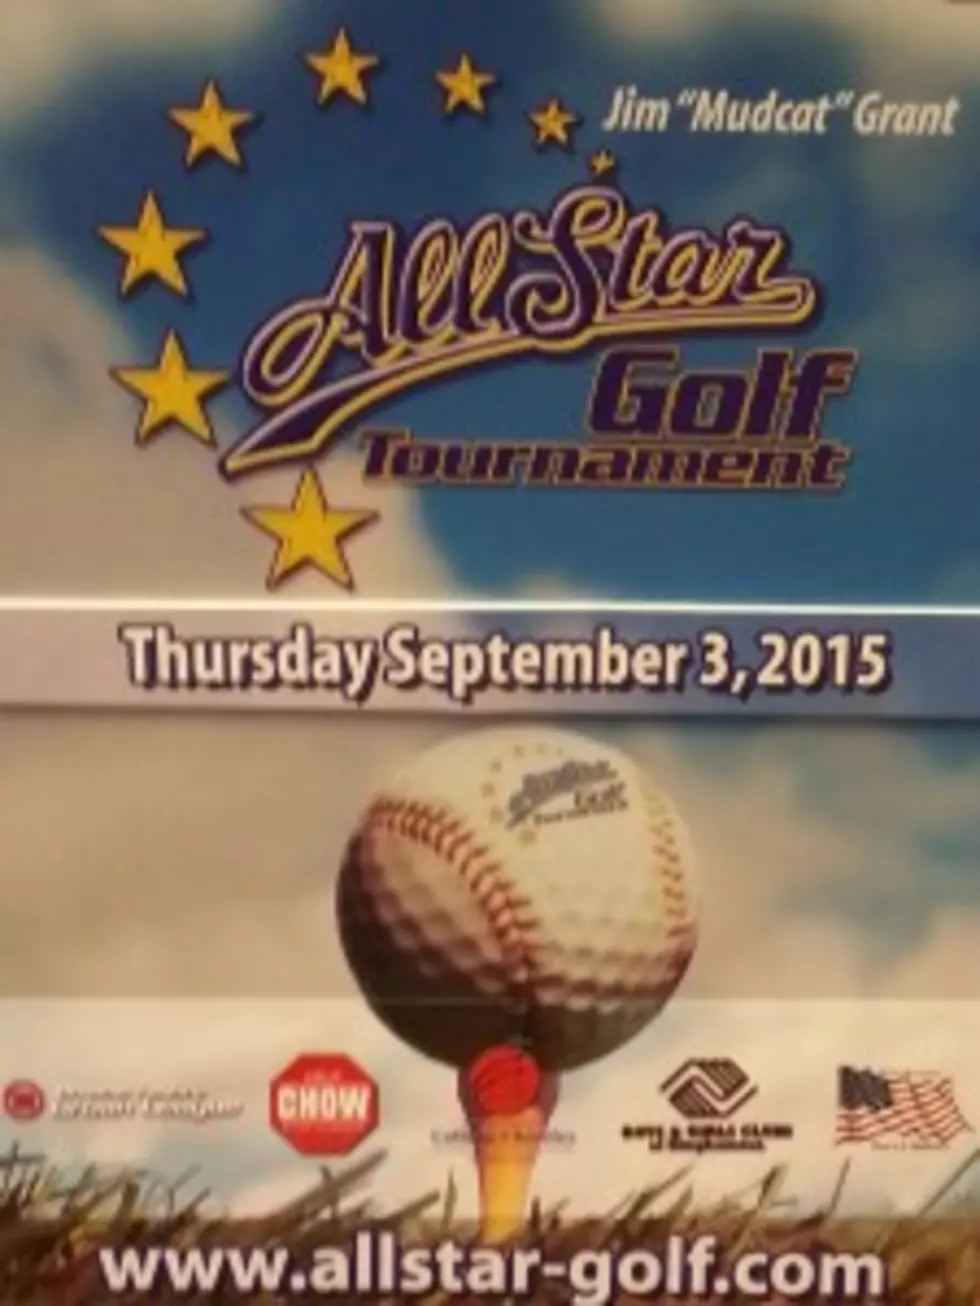 All Star Golf Tournament Featured on Southern Tier Close Up